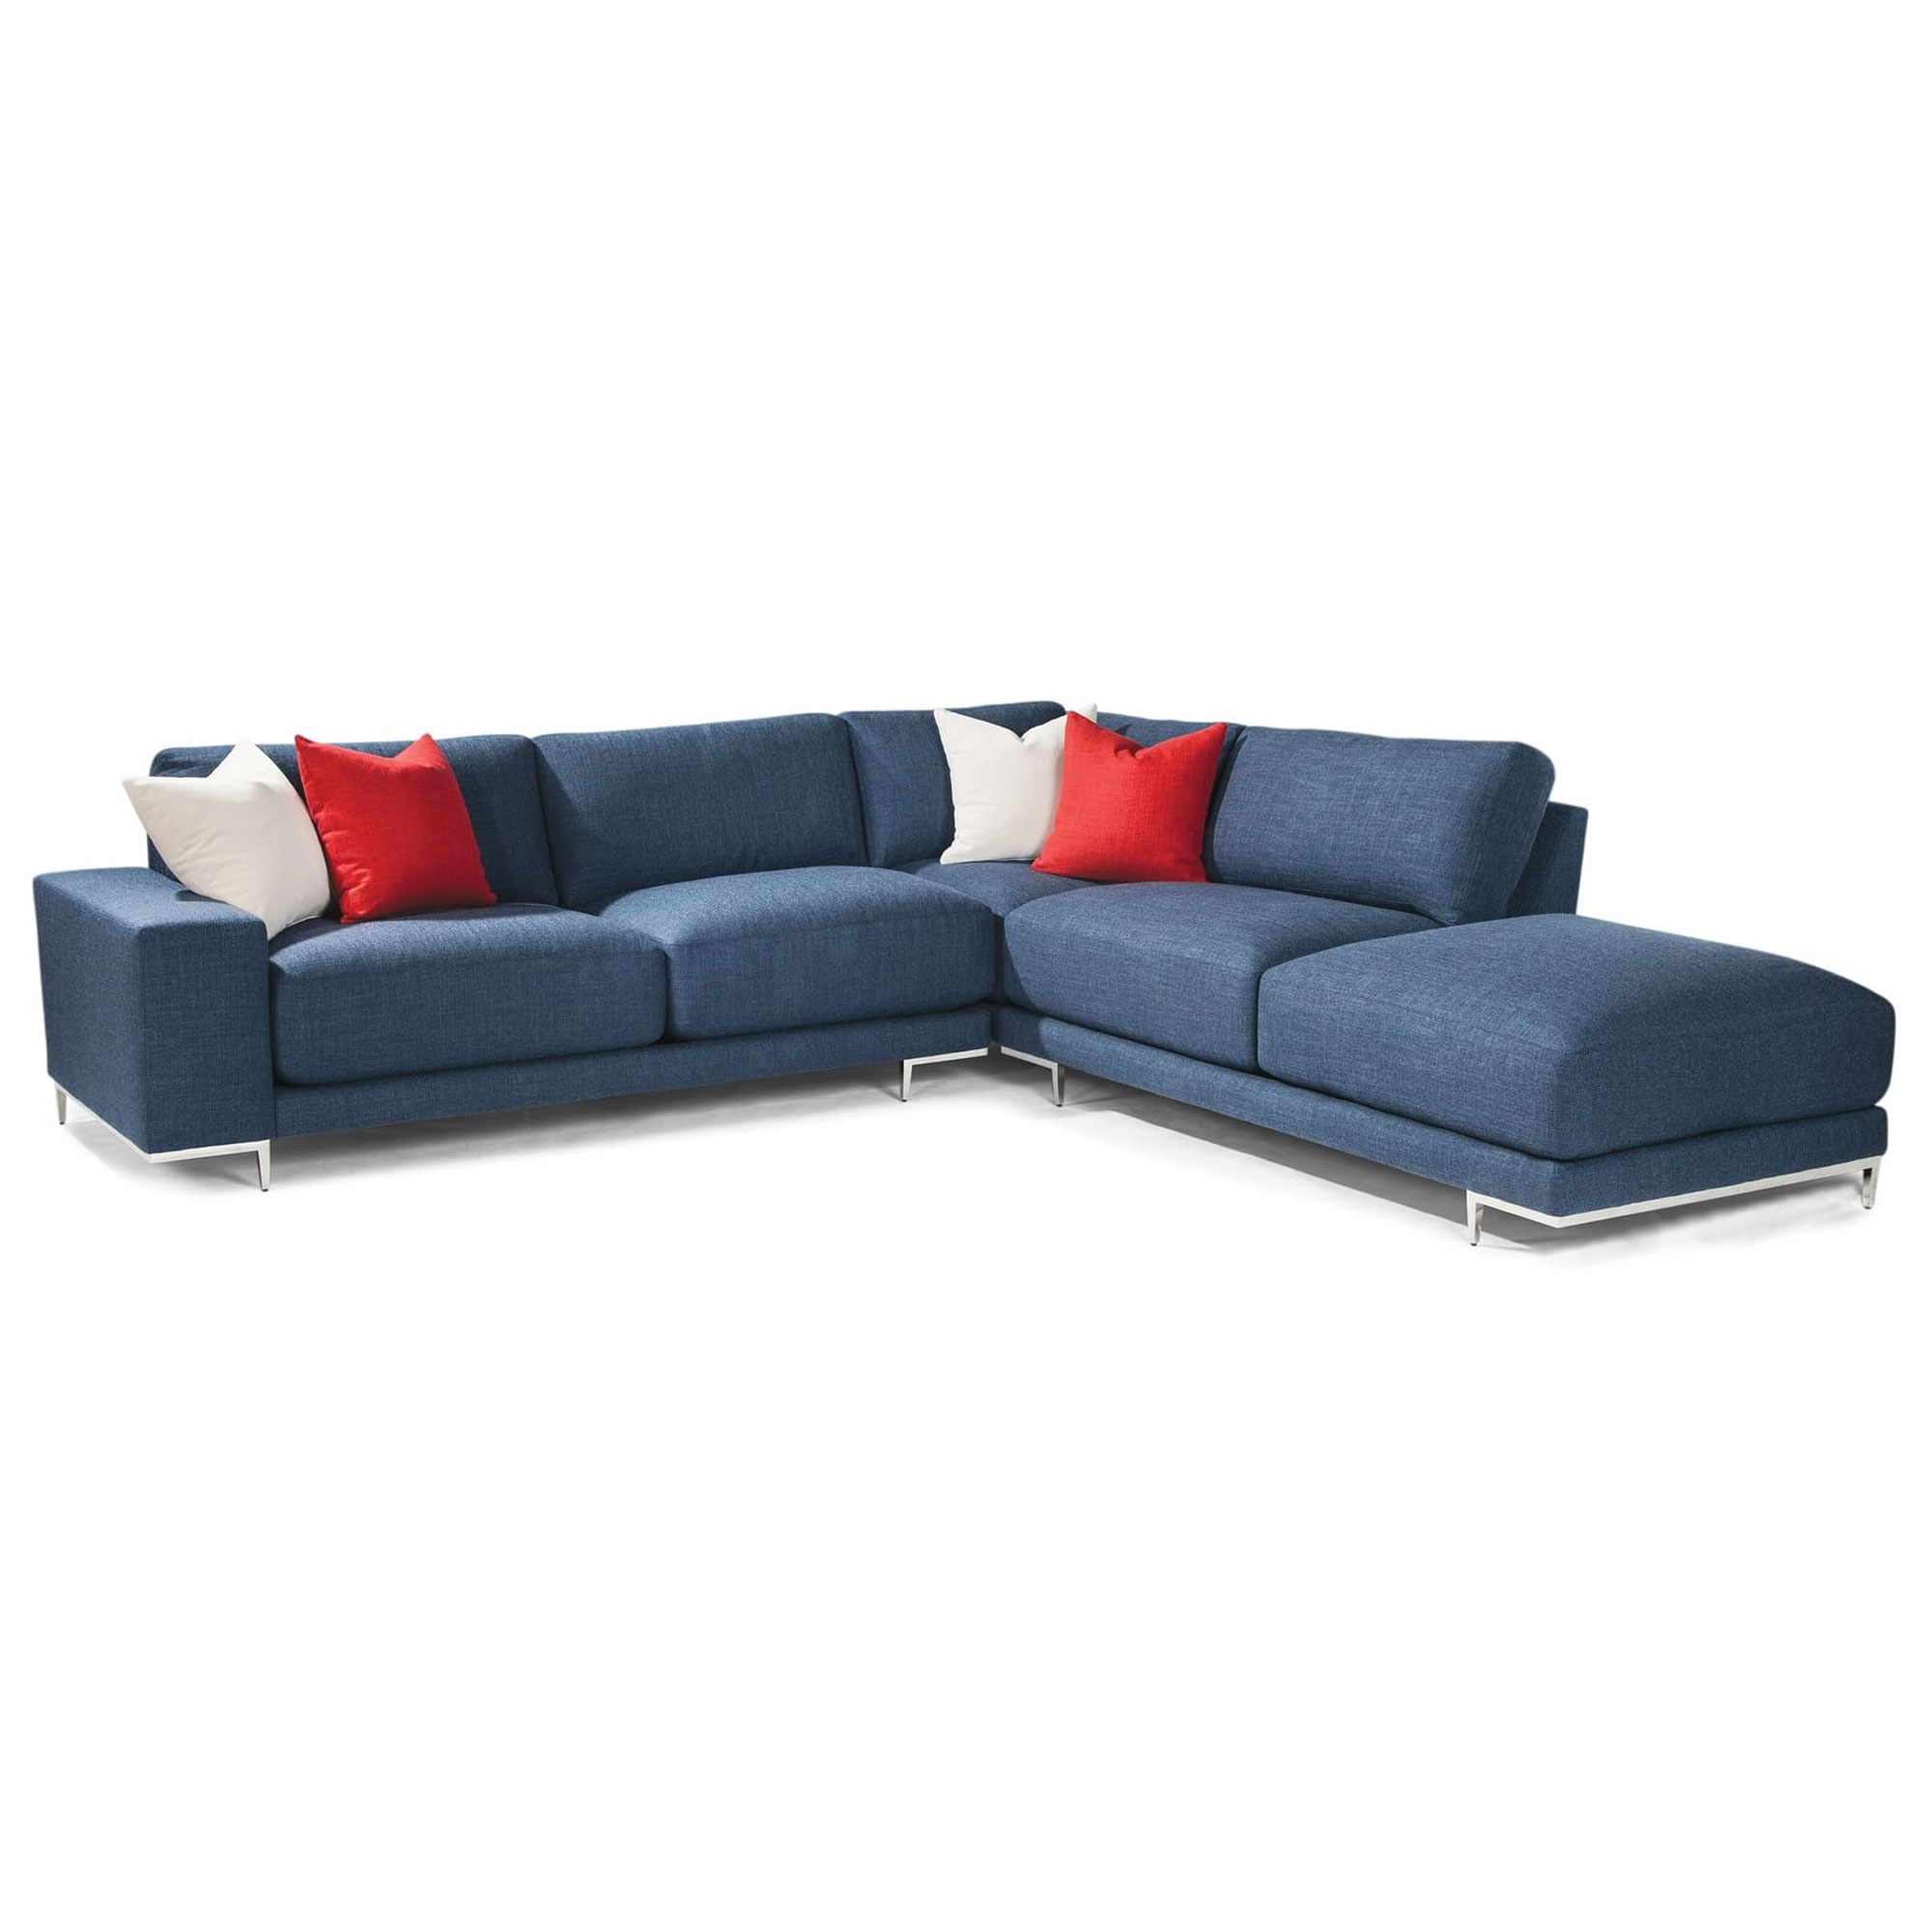 Thayer Coggin 1420 Hangover Chaise Sectional